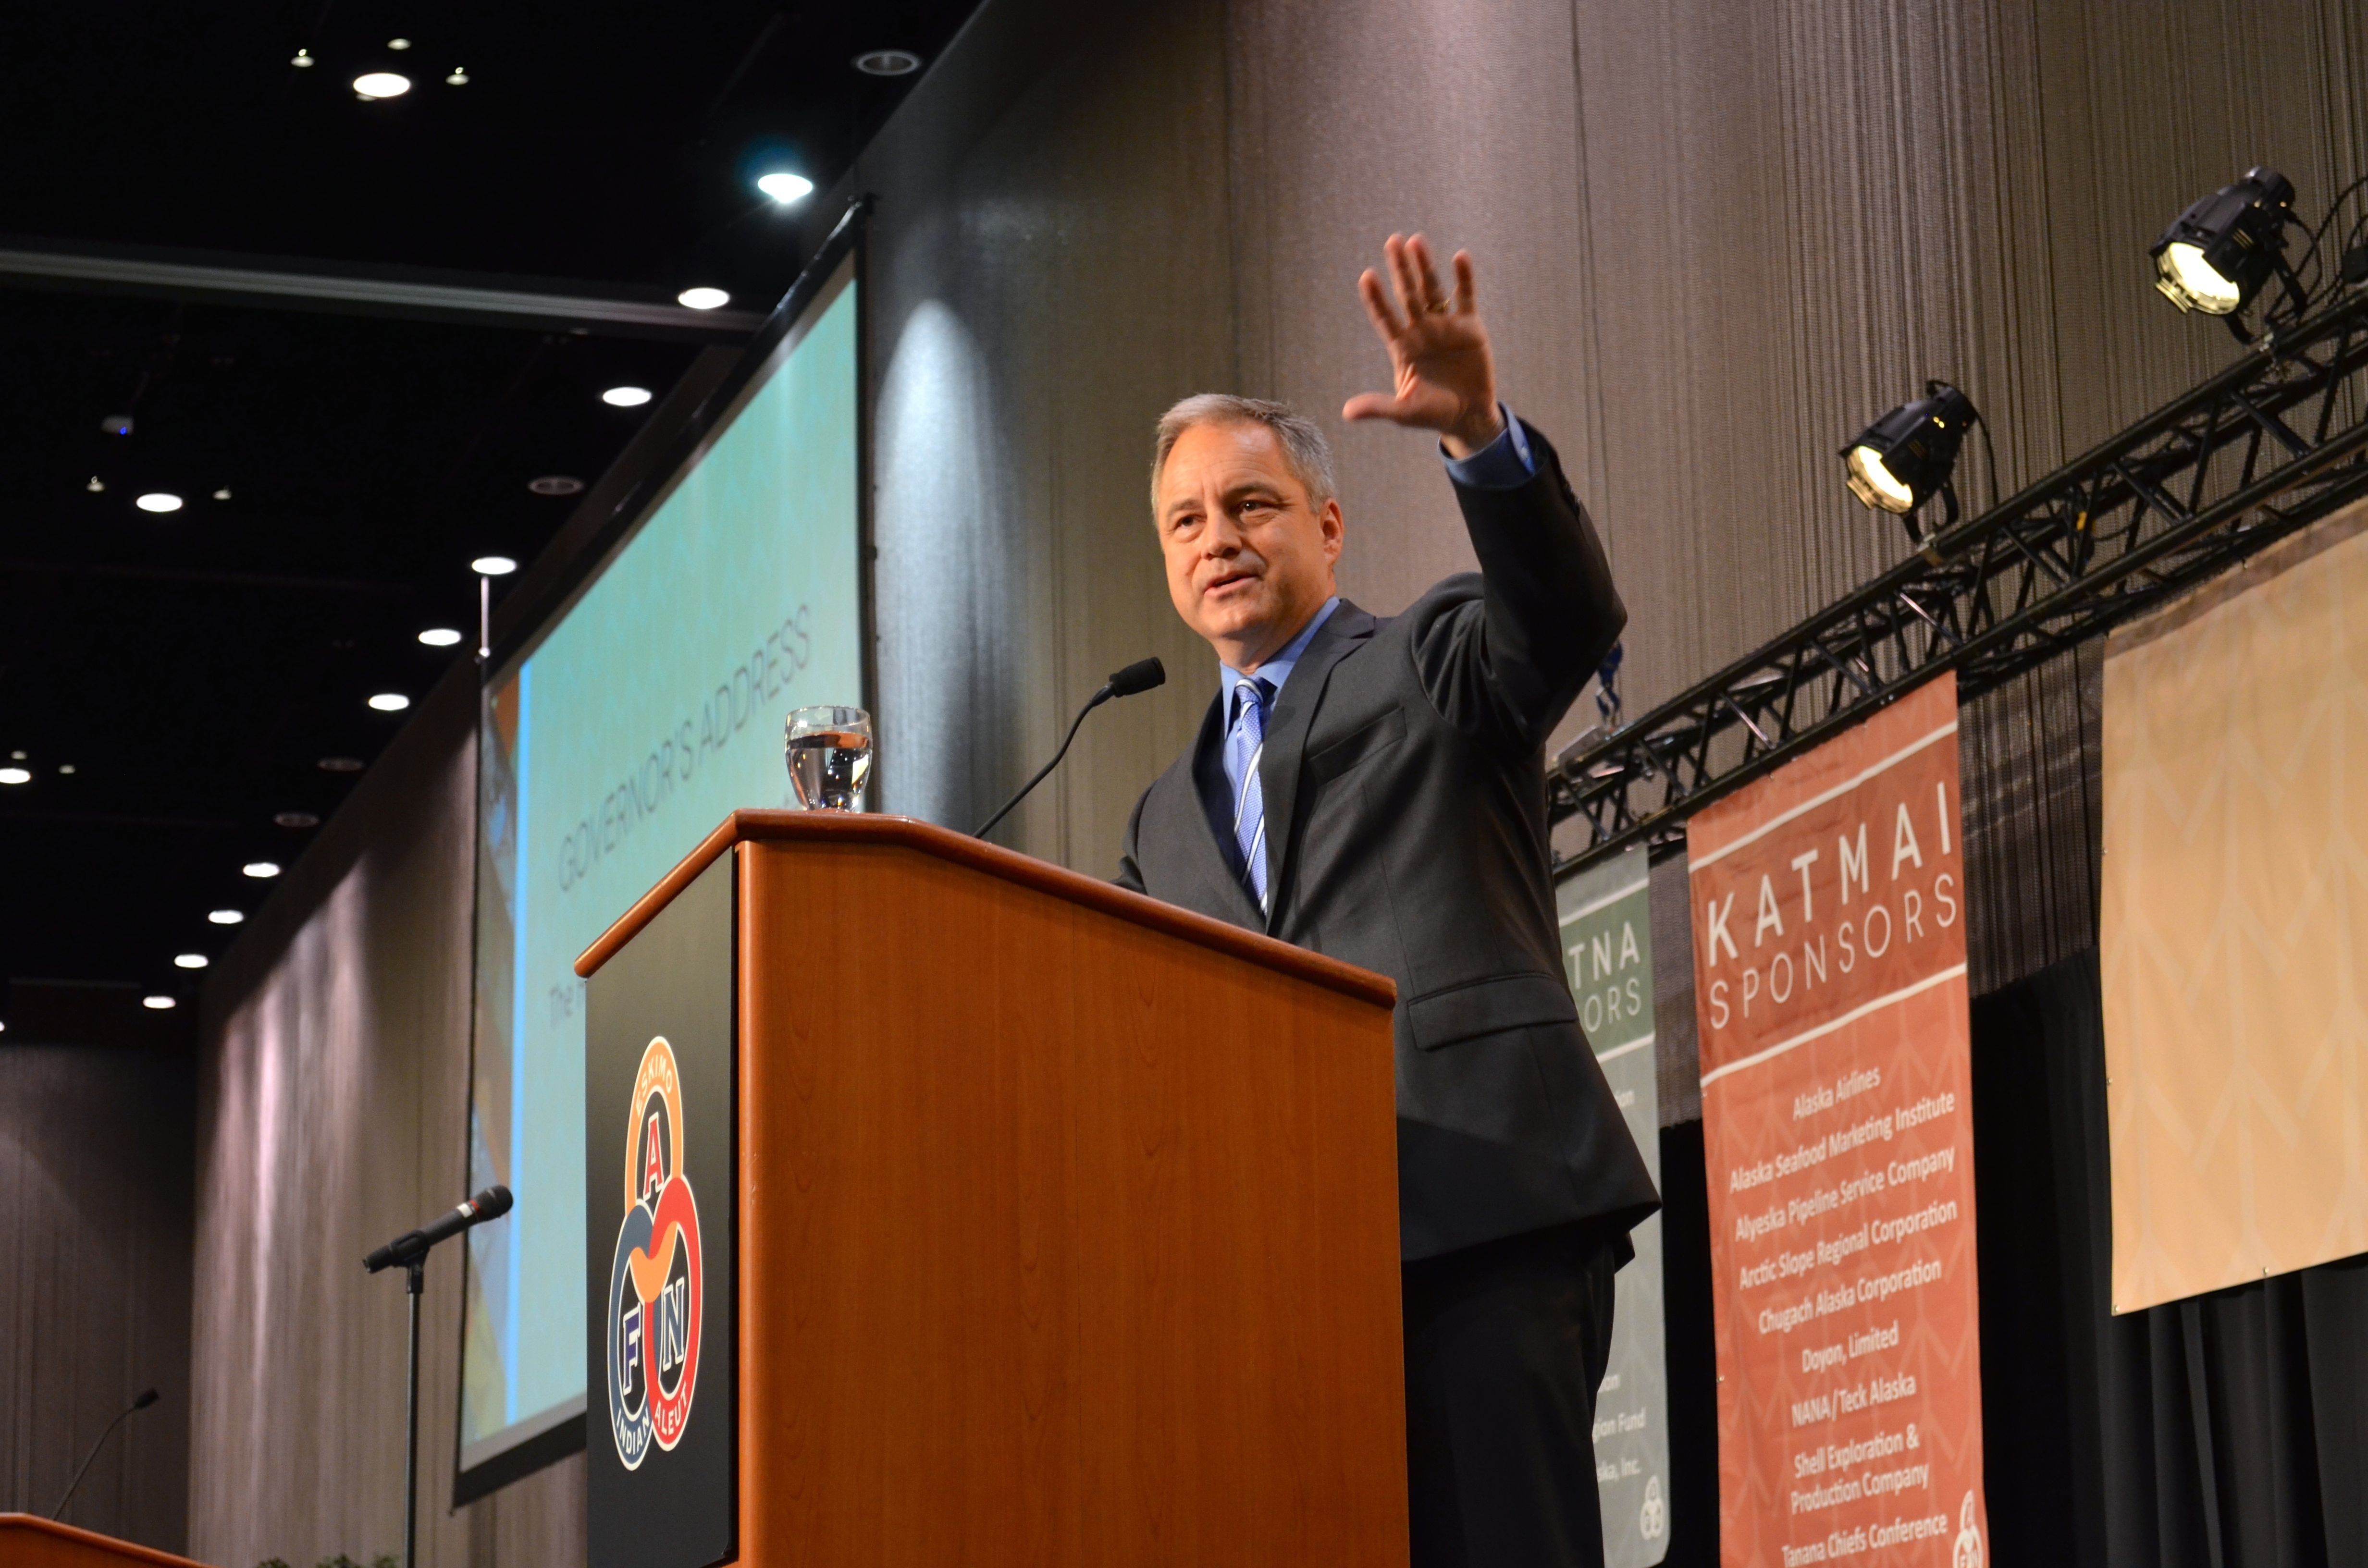 Gov. Sean Parnell gave opening remarks to delegates at the Alaska Federation of Natives Convention Thursday. (Photo by Jennifer Canfield/KTOO)